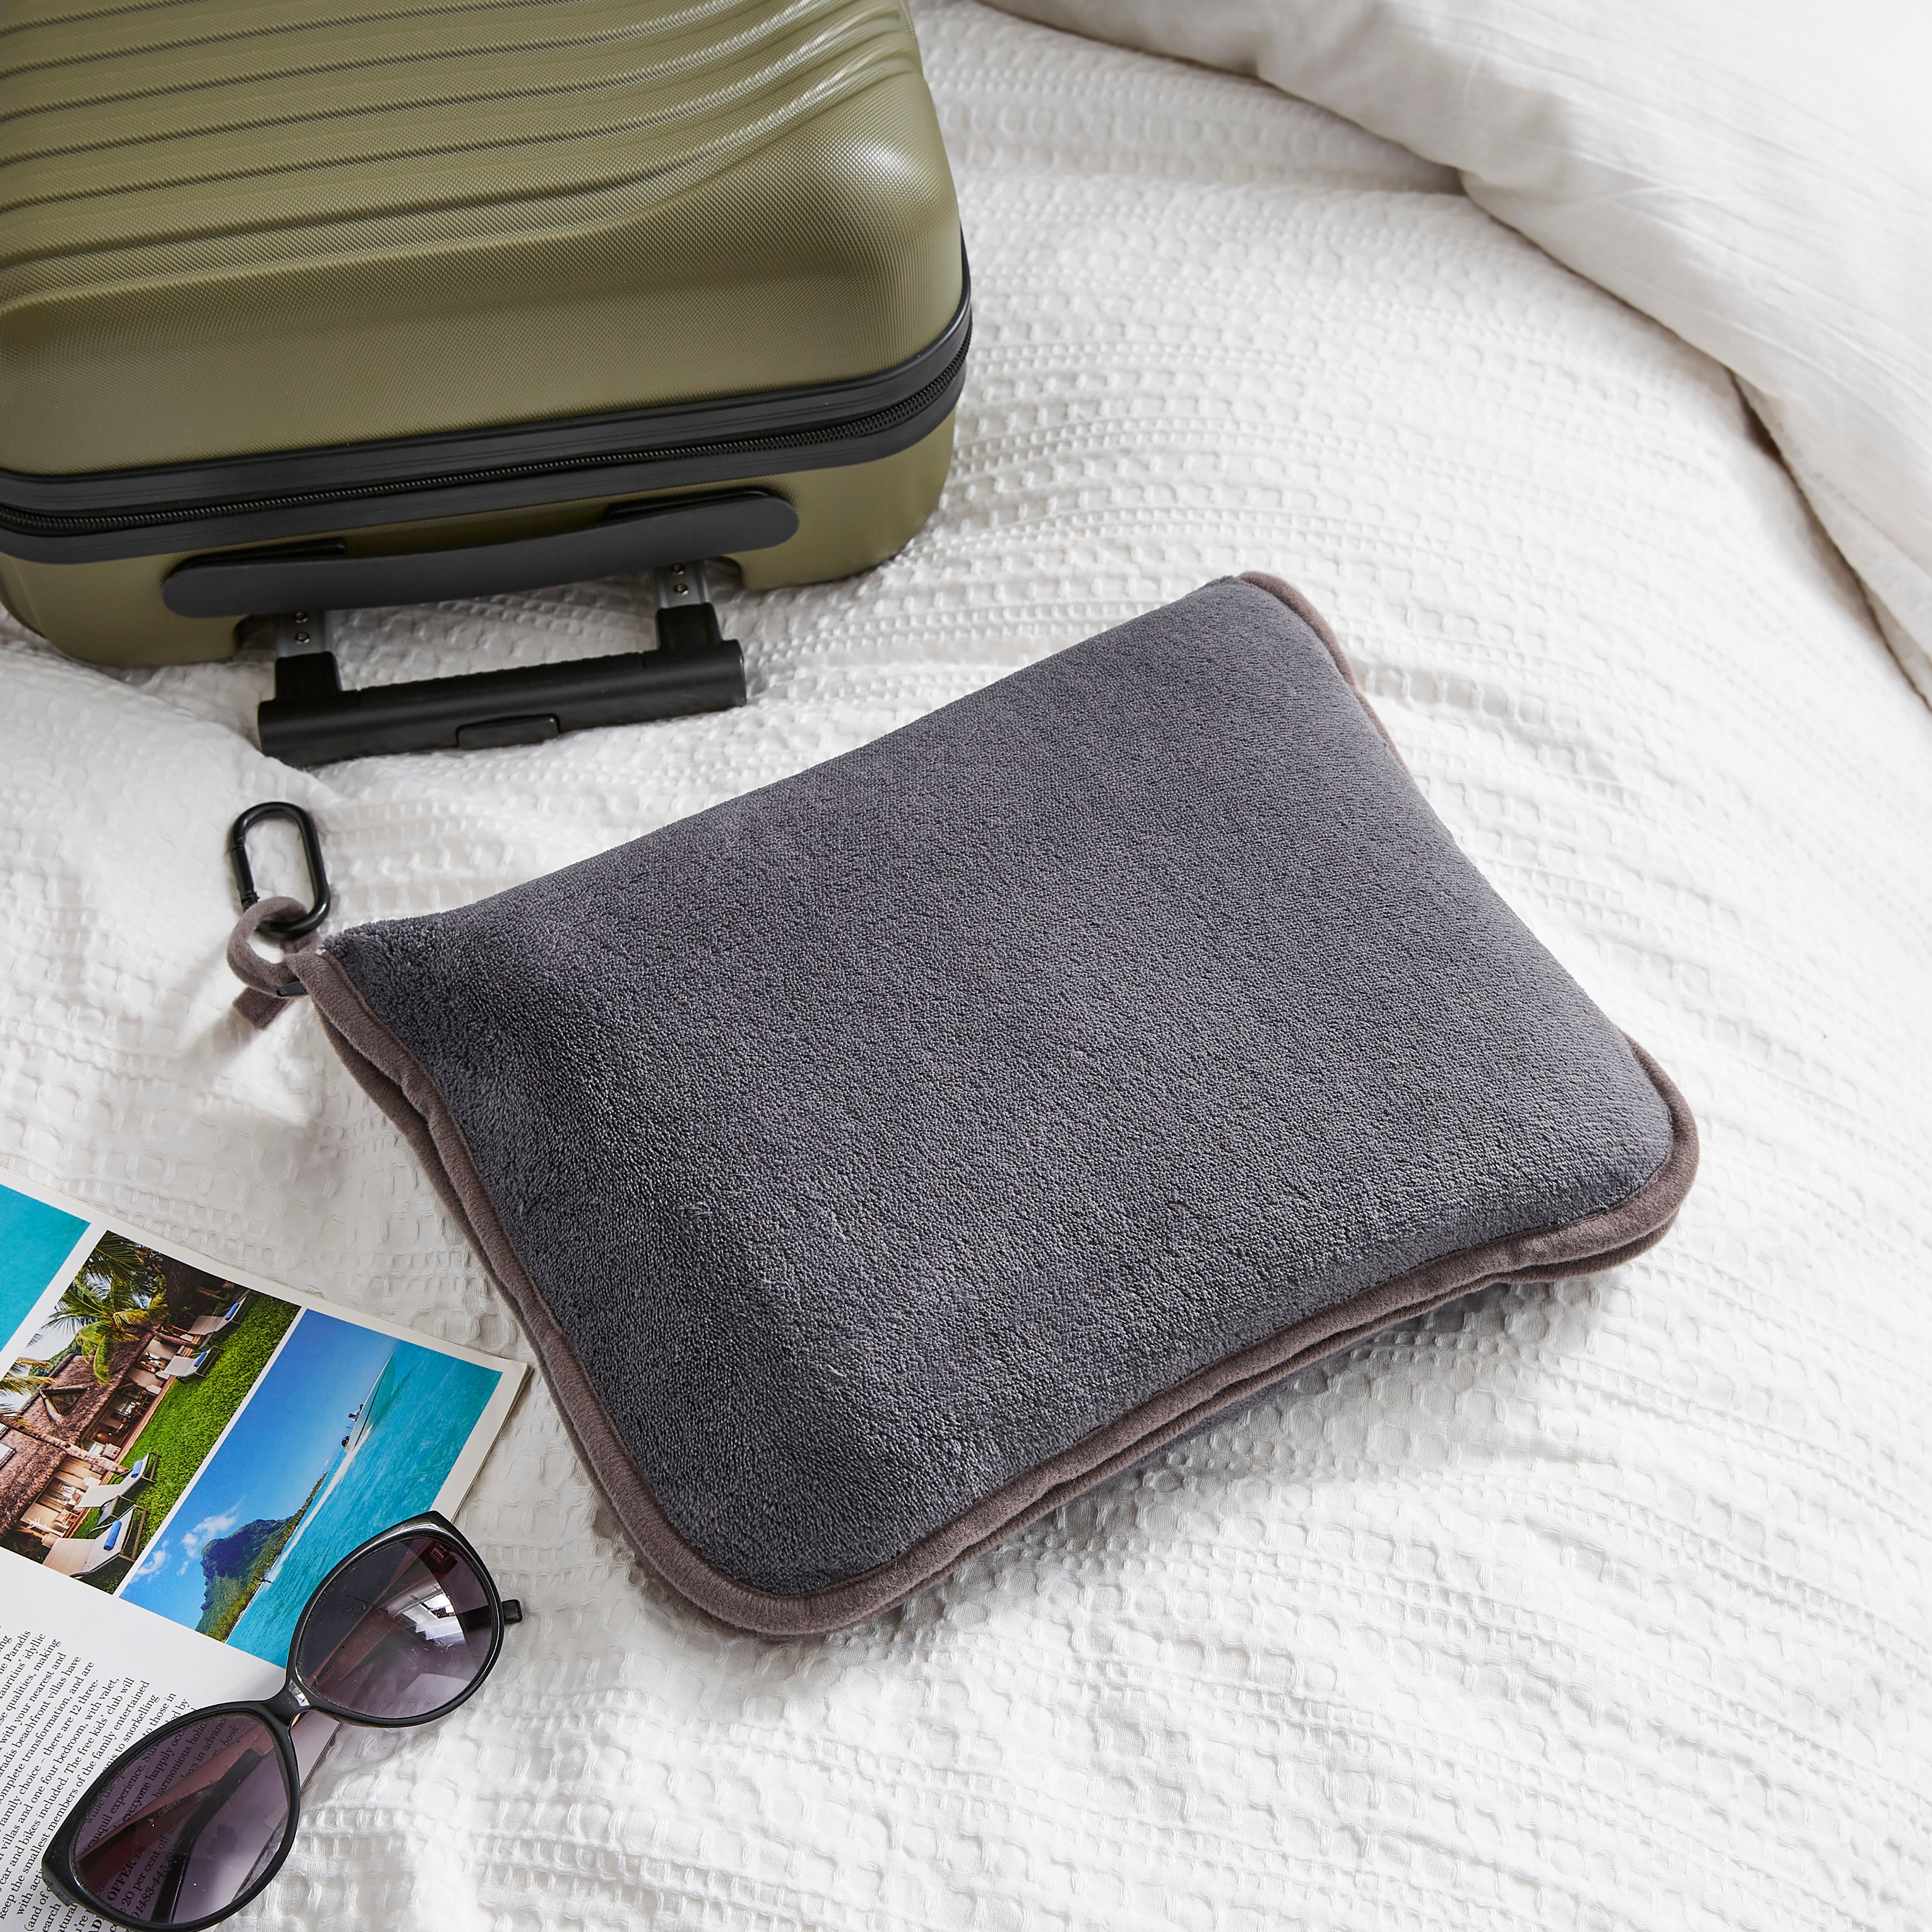 2n1 Travel Pillow And Blanket Grey